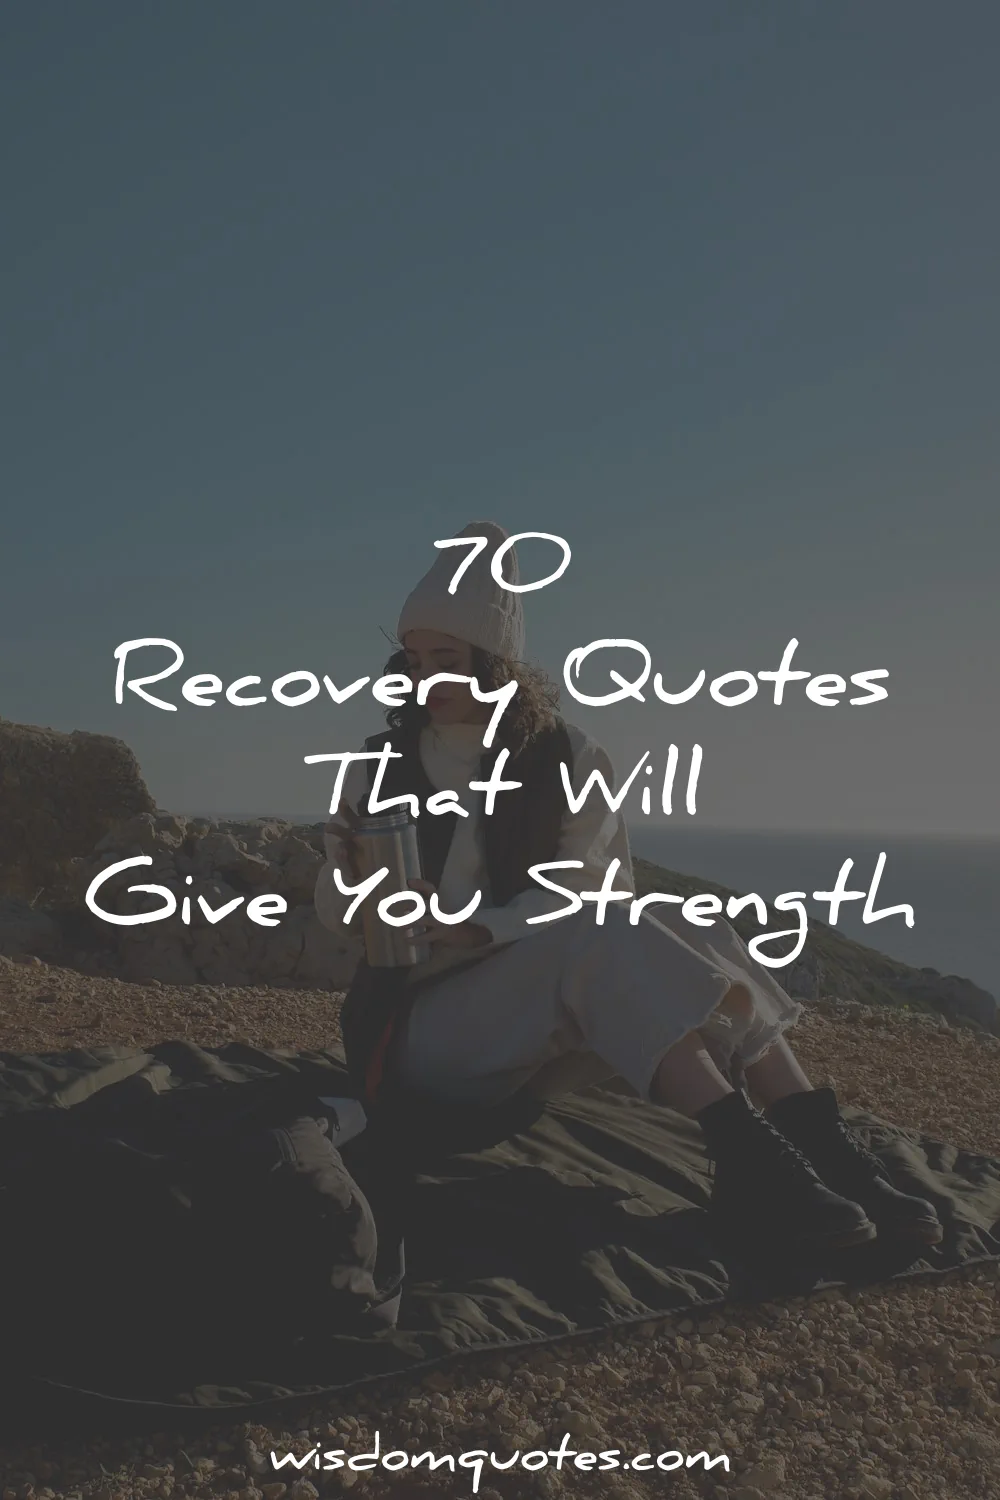 recovery quotes wisdom